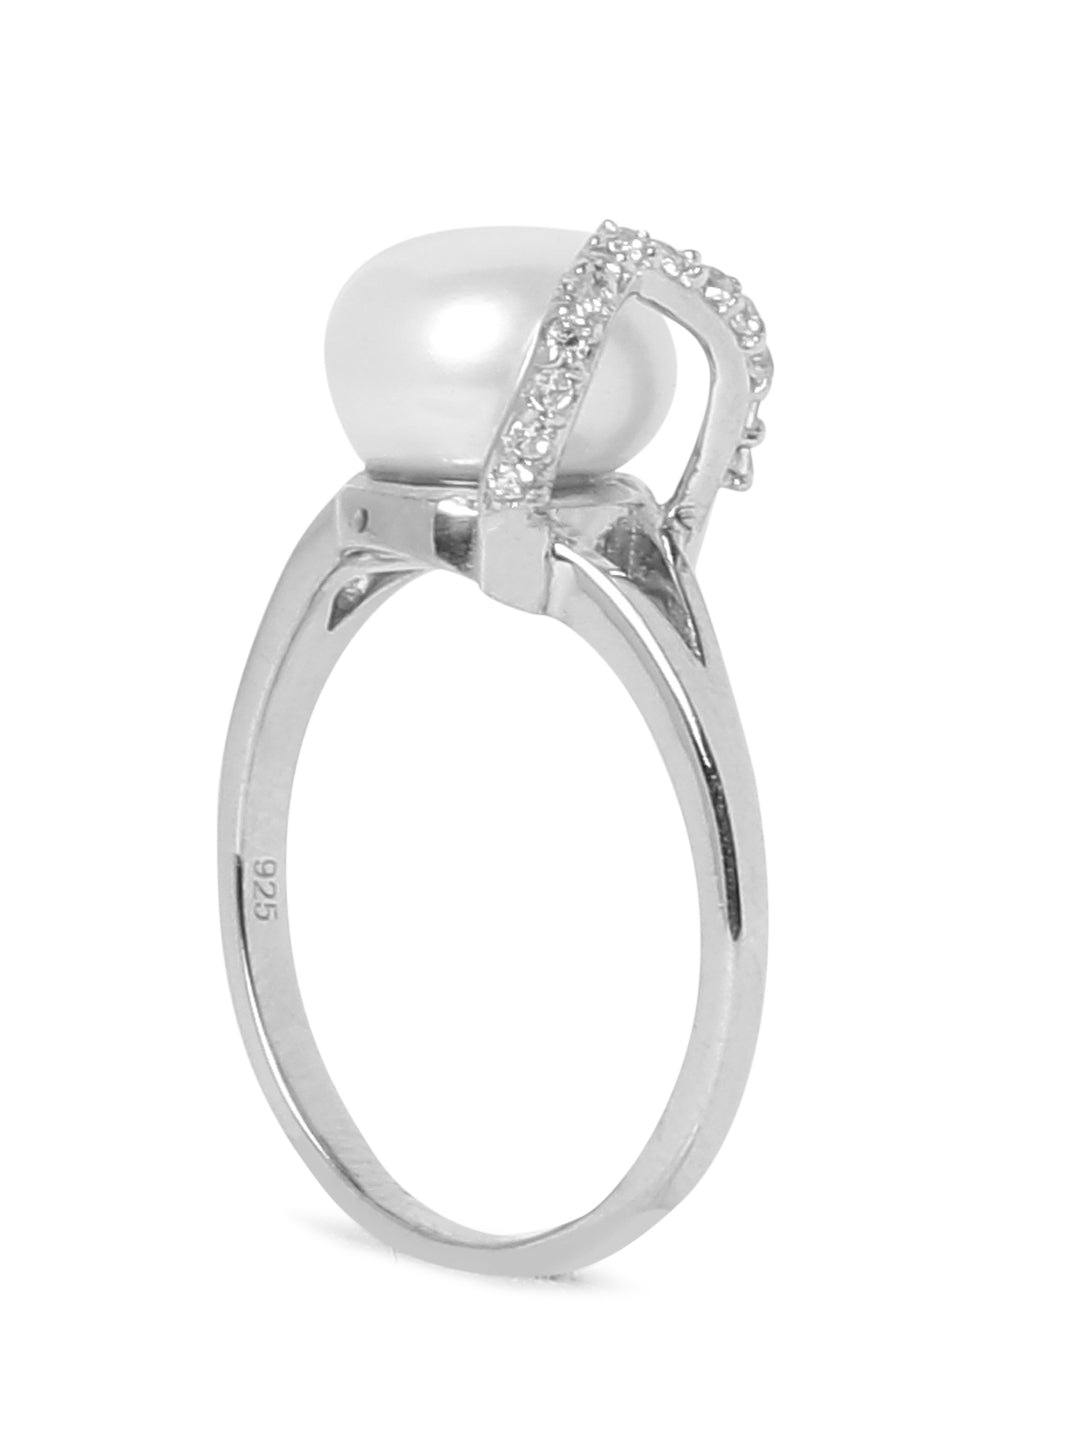 Shop white Freshwater Pearl Ring in 925 Sterling Silver – Trishona.com